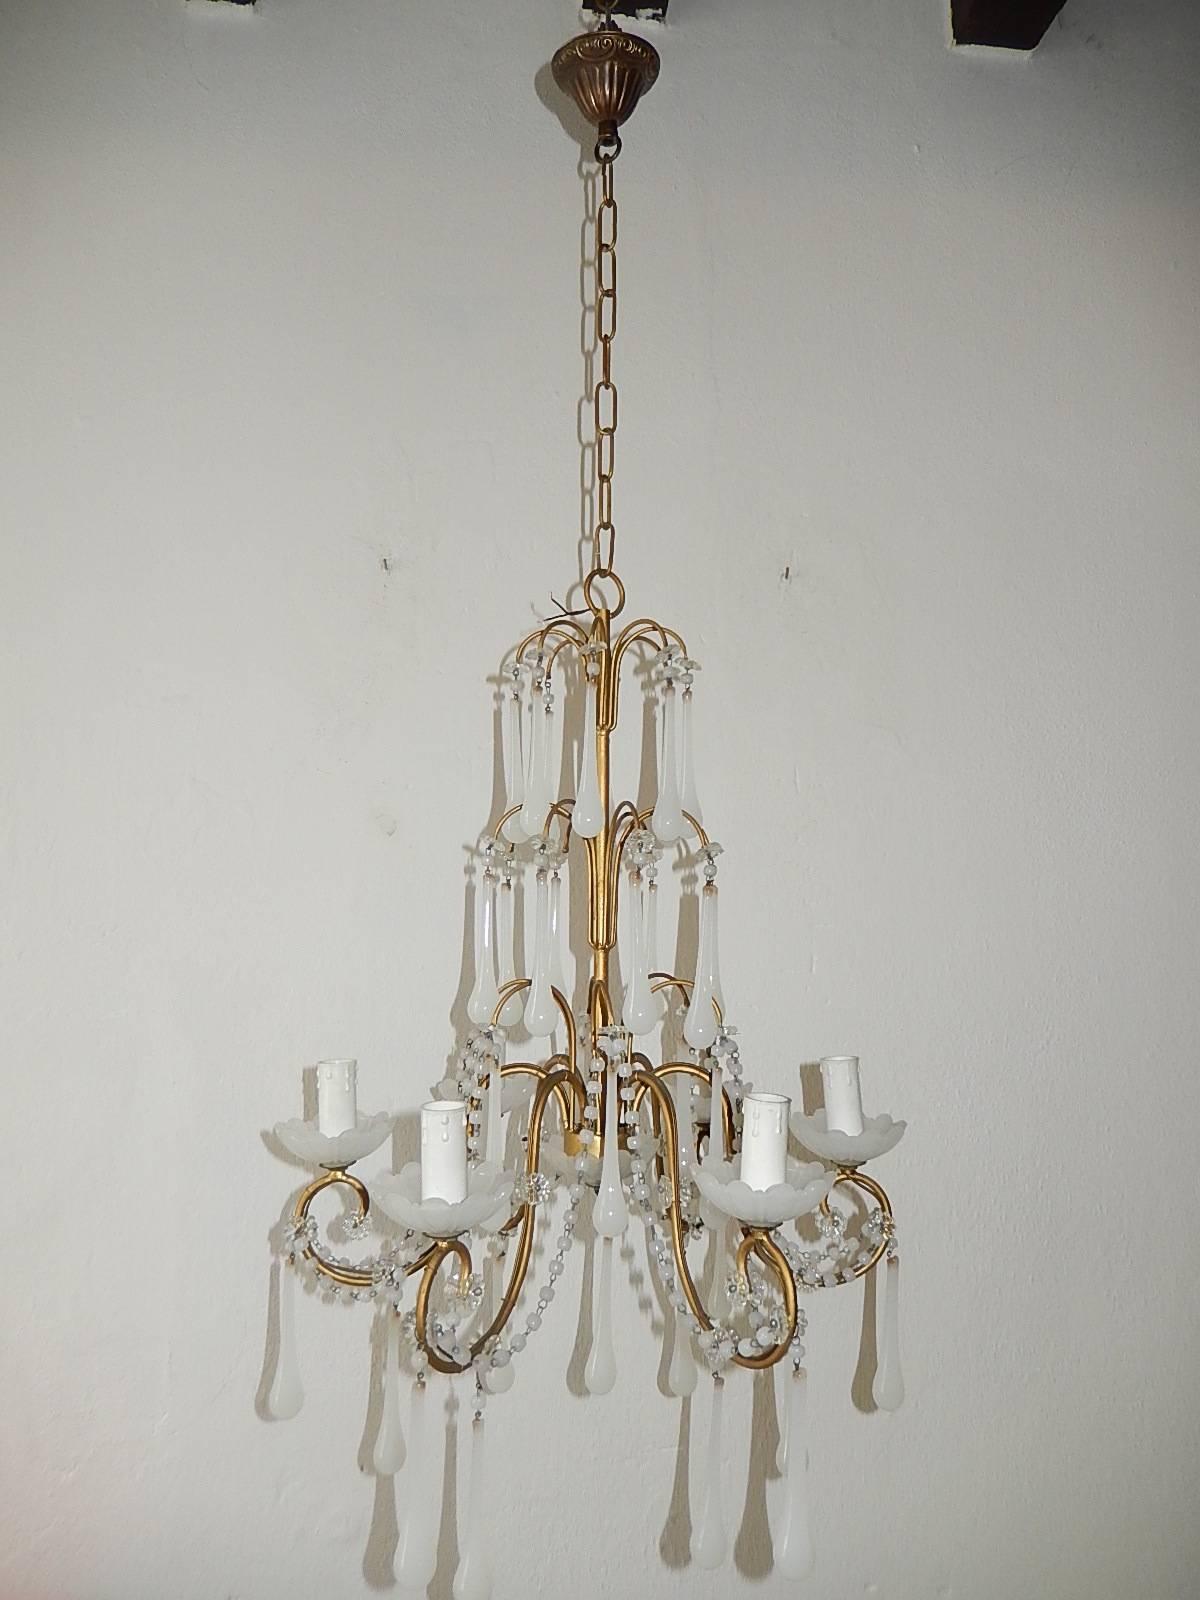 1930 French White Opaline Bobeches, Beads and Drops Chandelier 2